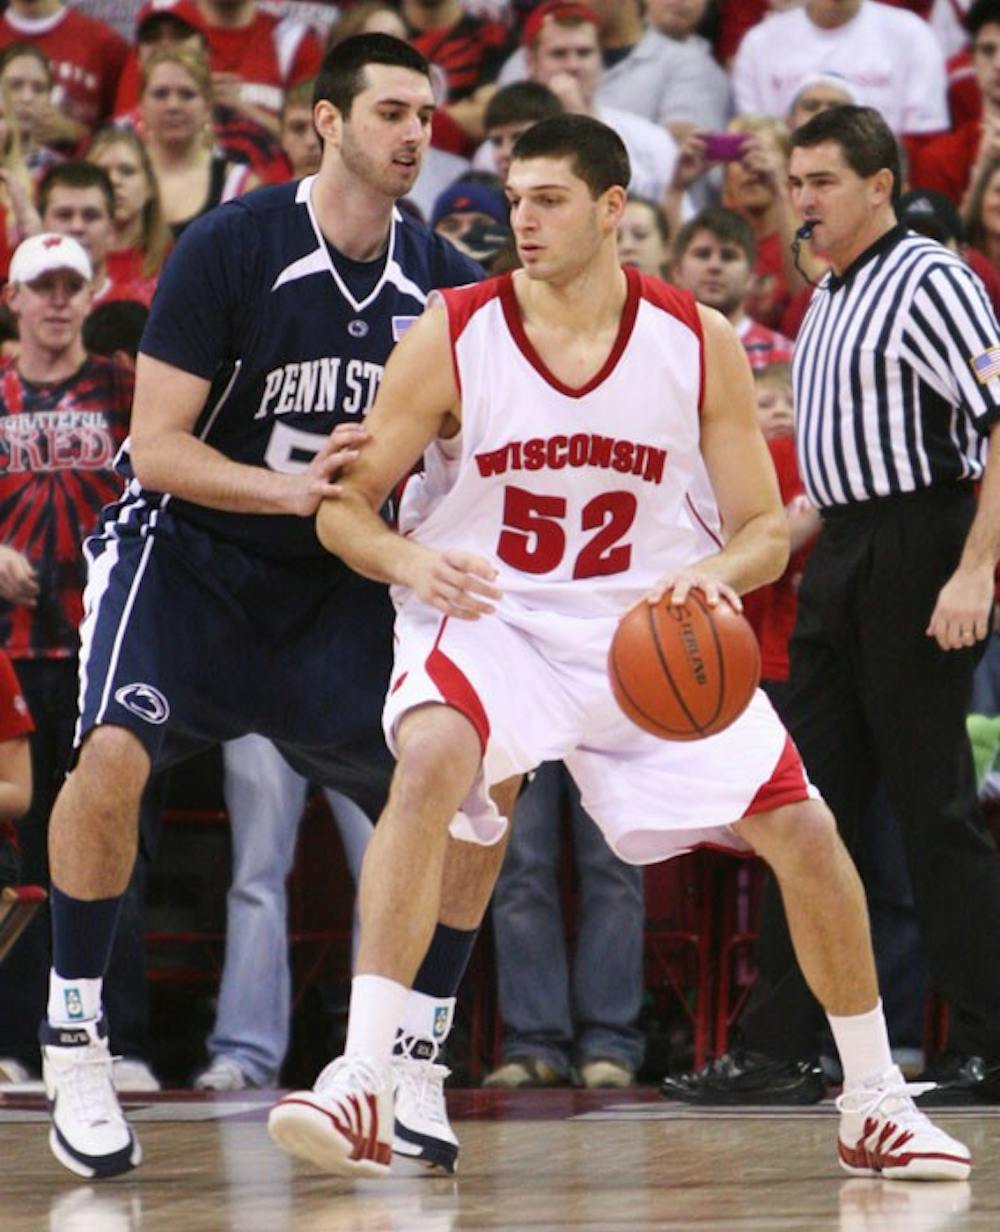 Badgers survive scare at the hands of Penn State